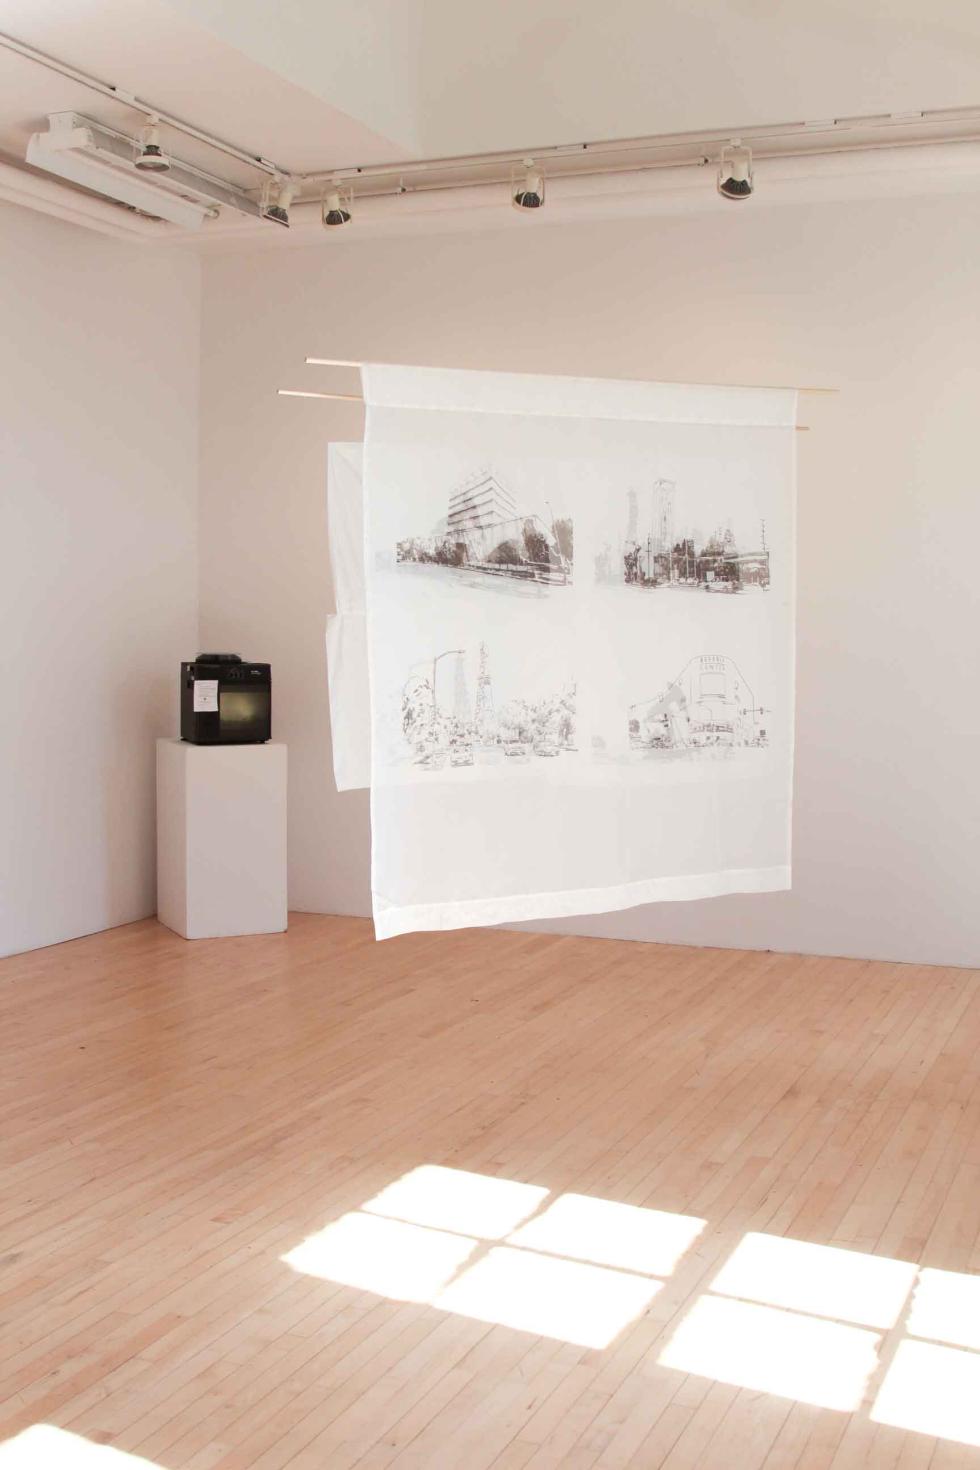 Hanging white banners next to a small tv slide projector on a white pedestal in a white room.